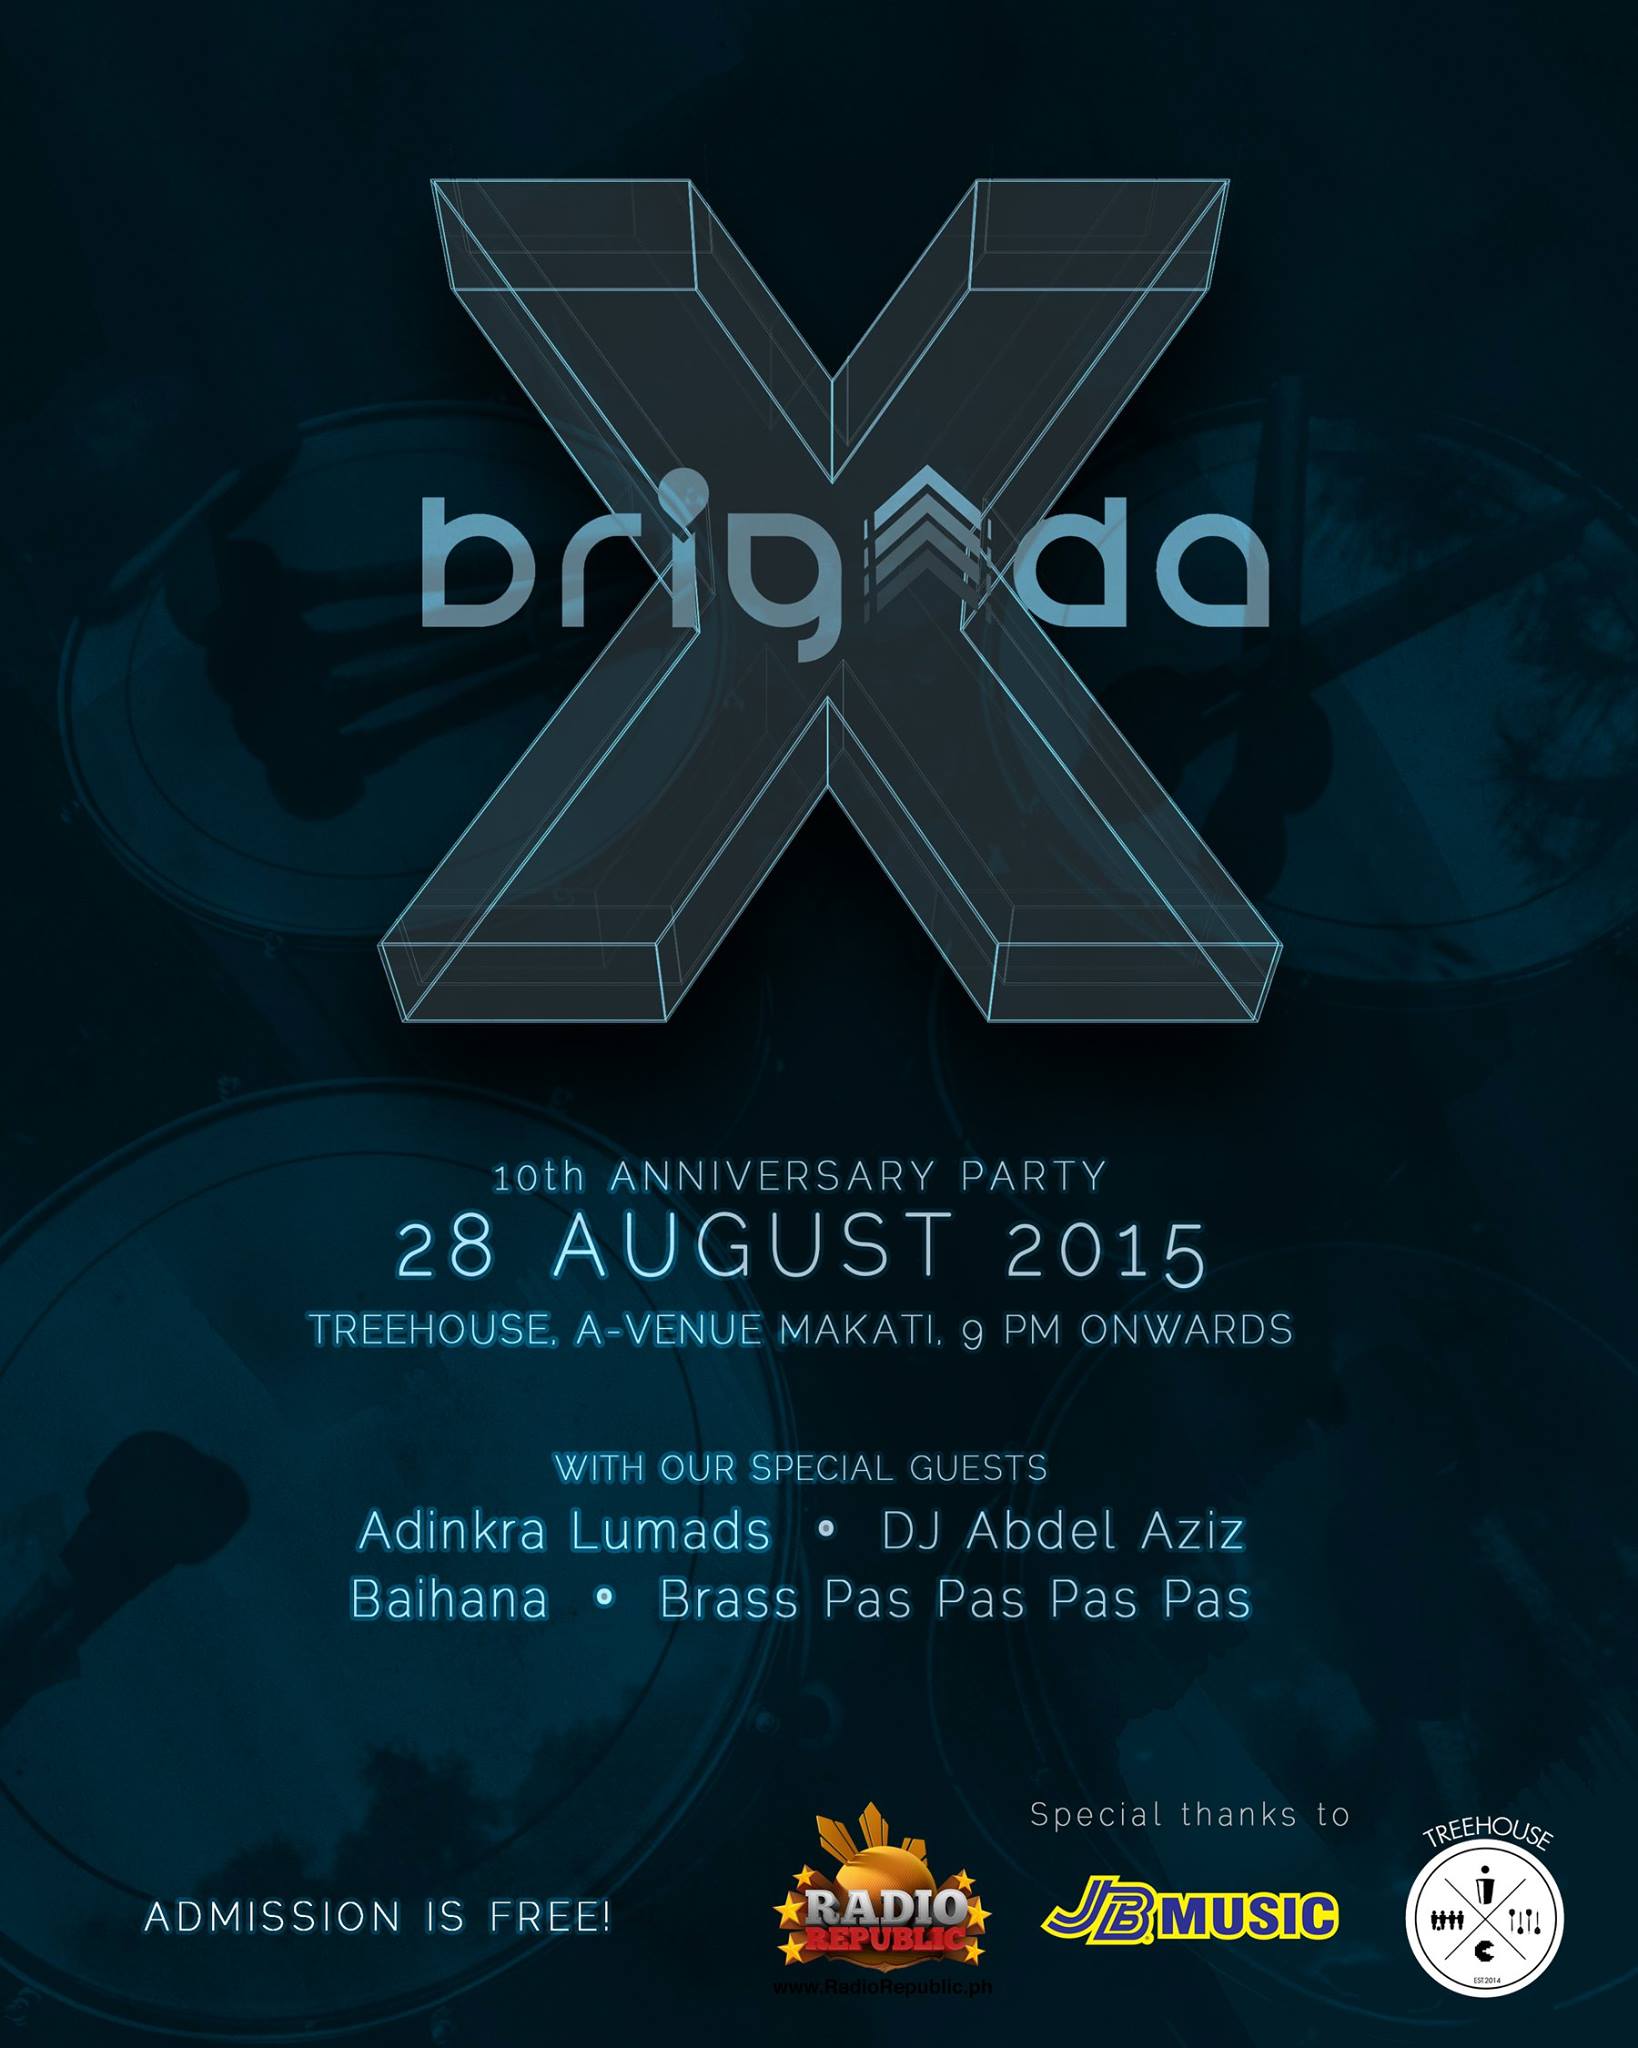 Brigada 10th Anniversary     Friday, August 28     at 9:00pm     2 days from now · 90°F / 75°F Chance of a Thunderstorm     	     Show Map     TreehousePh     2nd Floor, A-Venue Makati Ave, Makati Come and celebrate 10 years with us! We'll be joined by some very special guests. Entrance is free. ------- Brigada 10th Year Anniversary Concert August 25, 2015 by Radio Republic Radio Republic’s Featured Artist for the month of August is Brigada and as part of our feature on them, we are also celebrating their 10th year anniversary in a show that is sure to get you movin’ and groovin’ to the music! With support acts Adinkra Lumads, Brass Pas Pas Pas Pas, Baihana and DJ Abdel Aziz, this night is sure to keep you on your feet and gettin’ down! Admission is free, the venue is pretty big, and the drinks are sure to cool you down from the heat we can all be sure to enjoy! See you there!